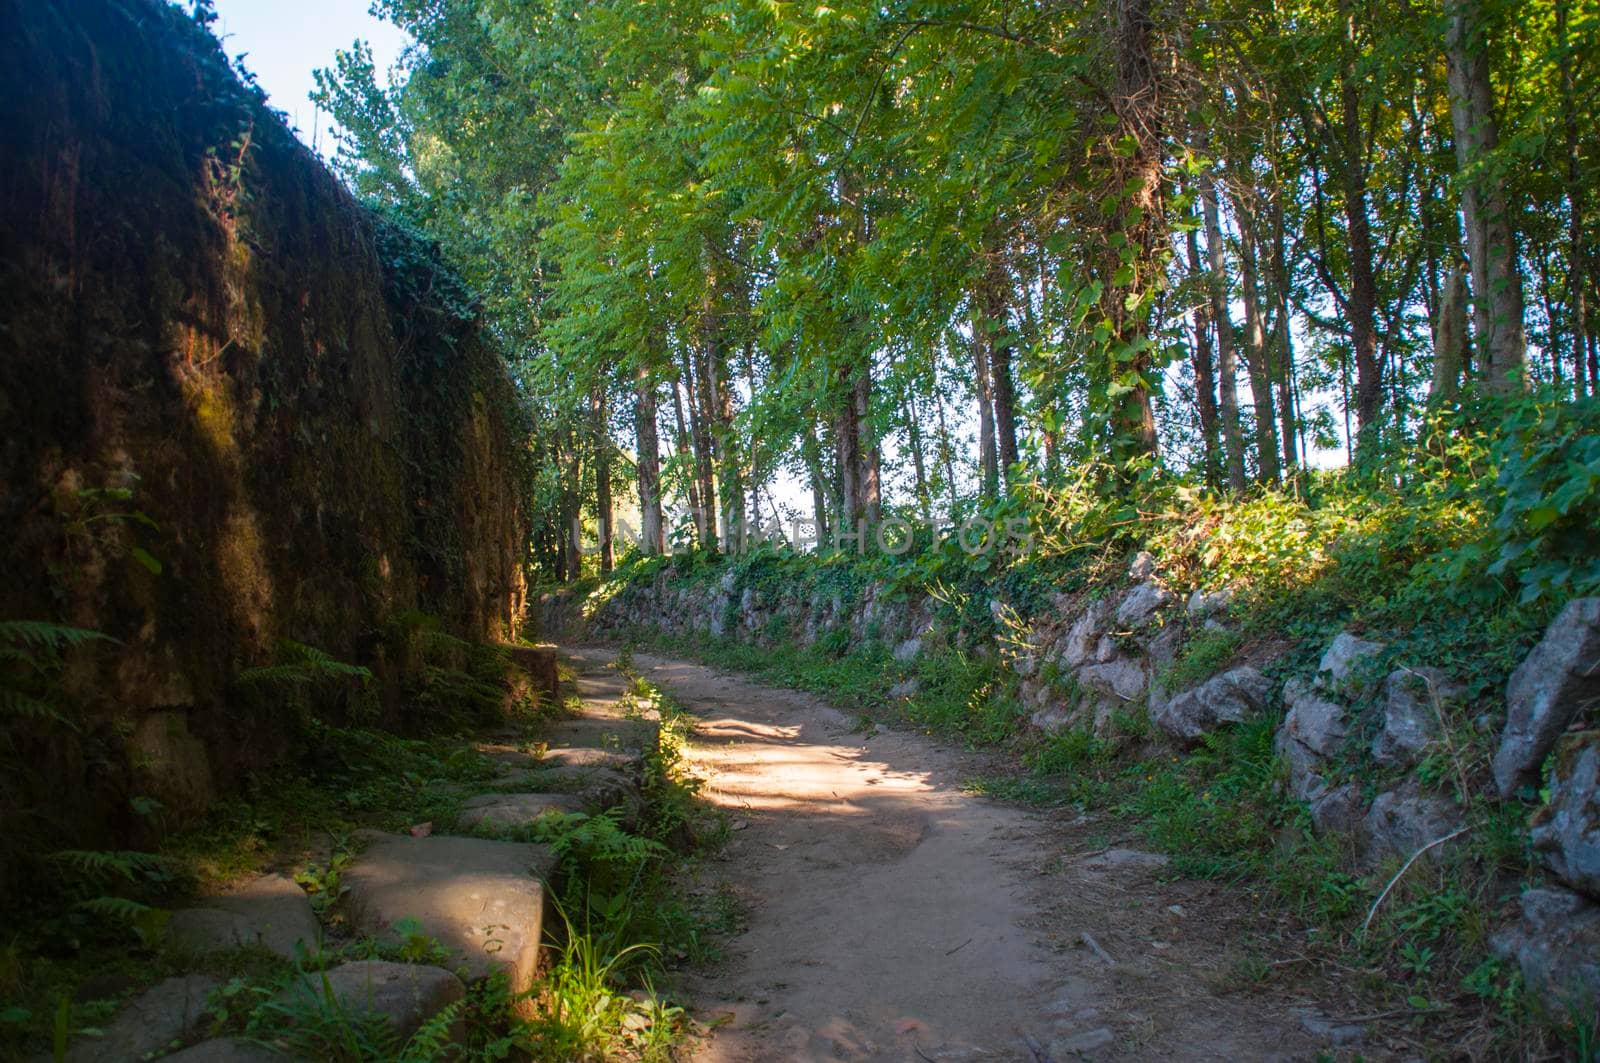 Part of the Way of St. James to Santiago de Compostela in Portugal. by Capos